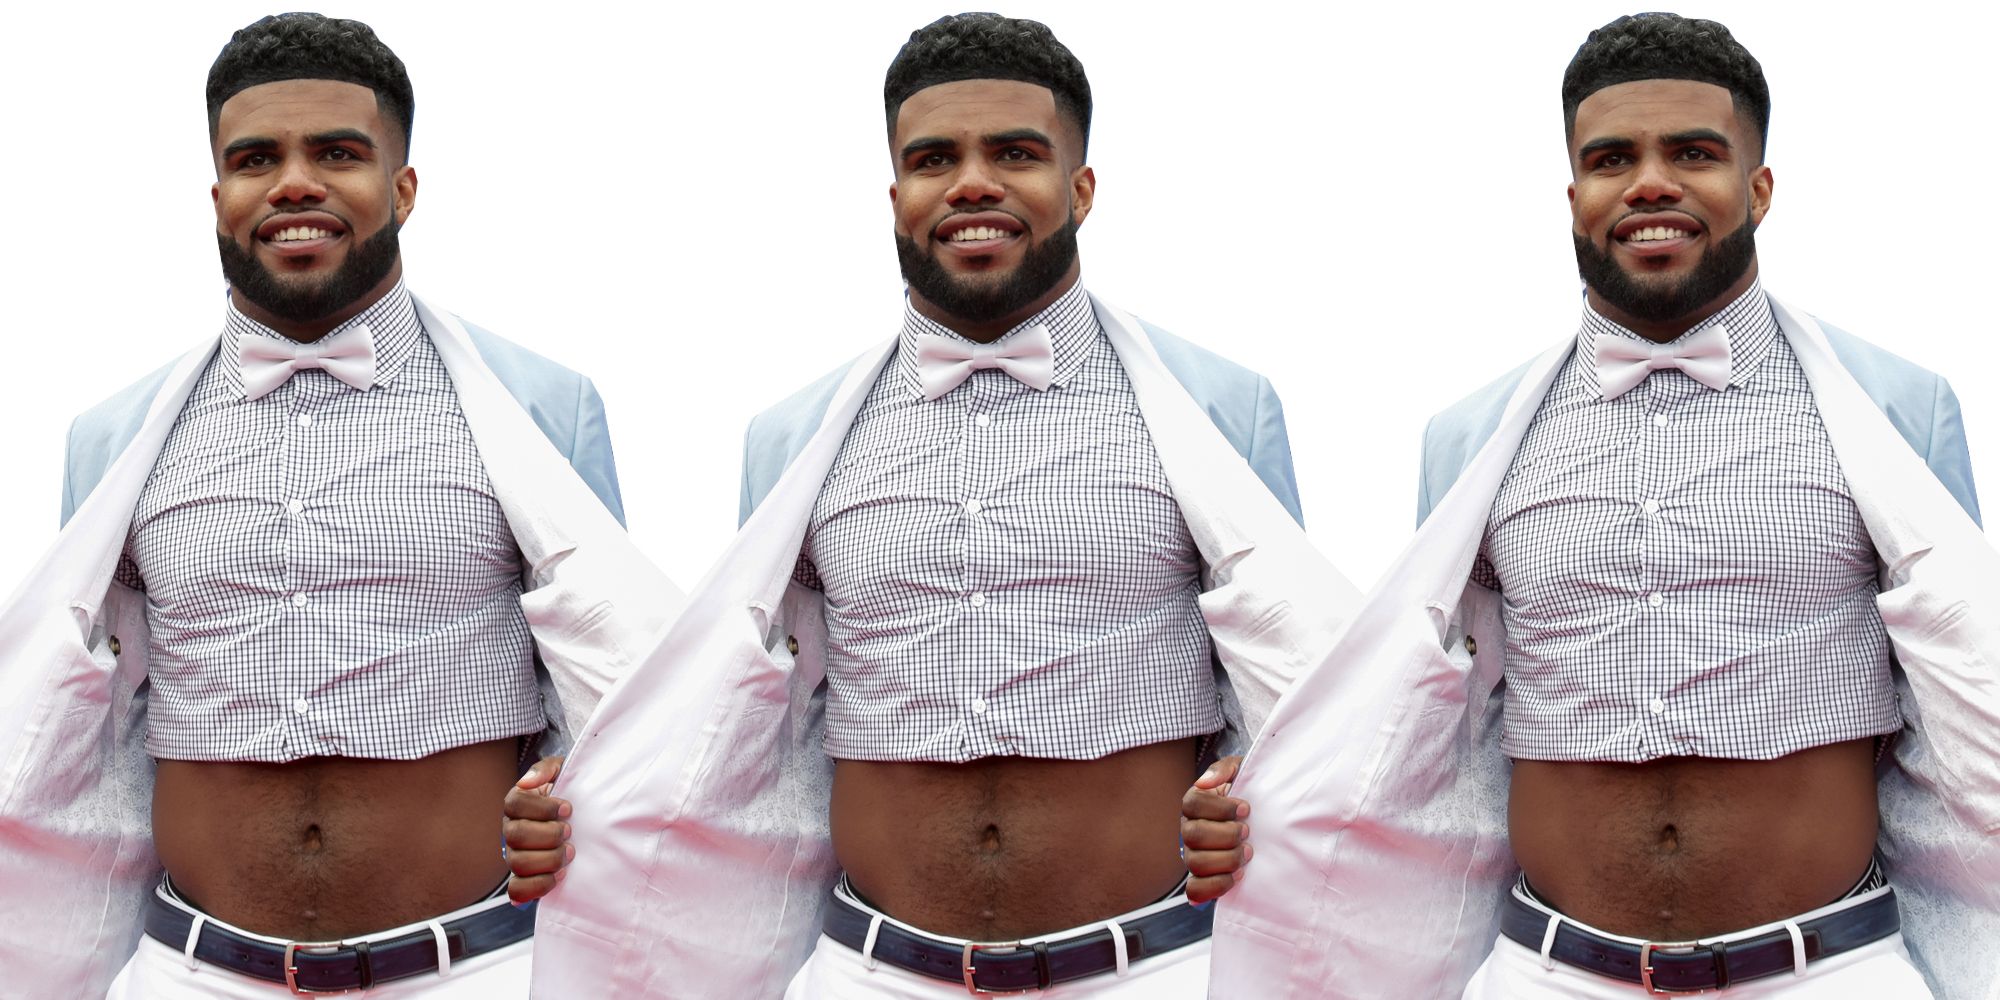 Why More Men are Wearing Crop Tops - The New York Times